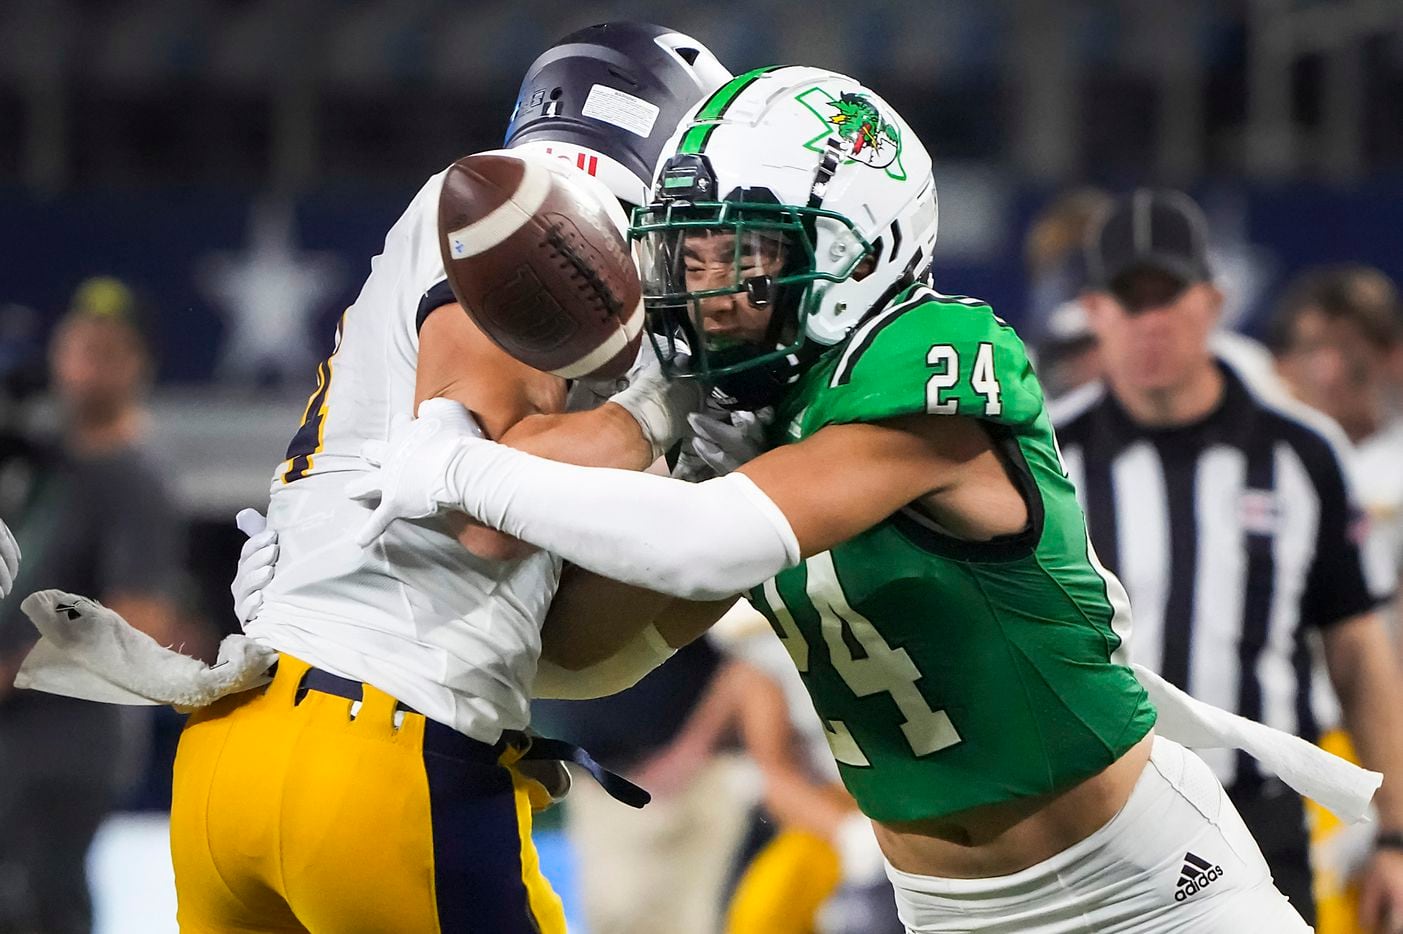 Southlake Carroll defensive back Max Reyes (24) forces a fumble by Highland Park running...